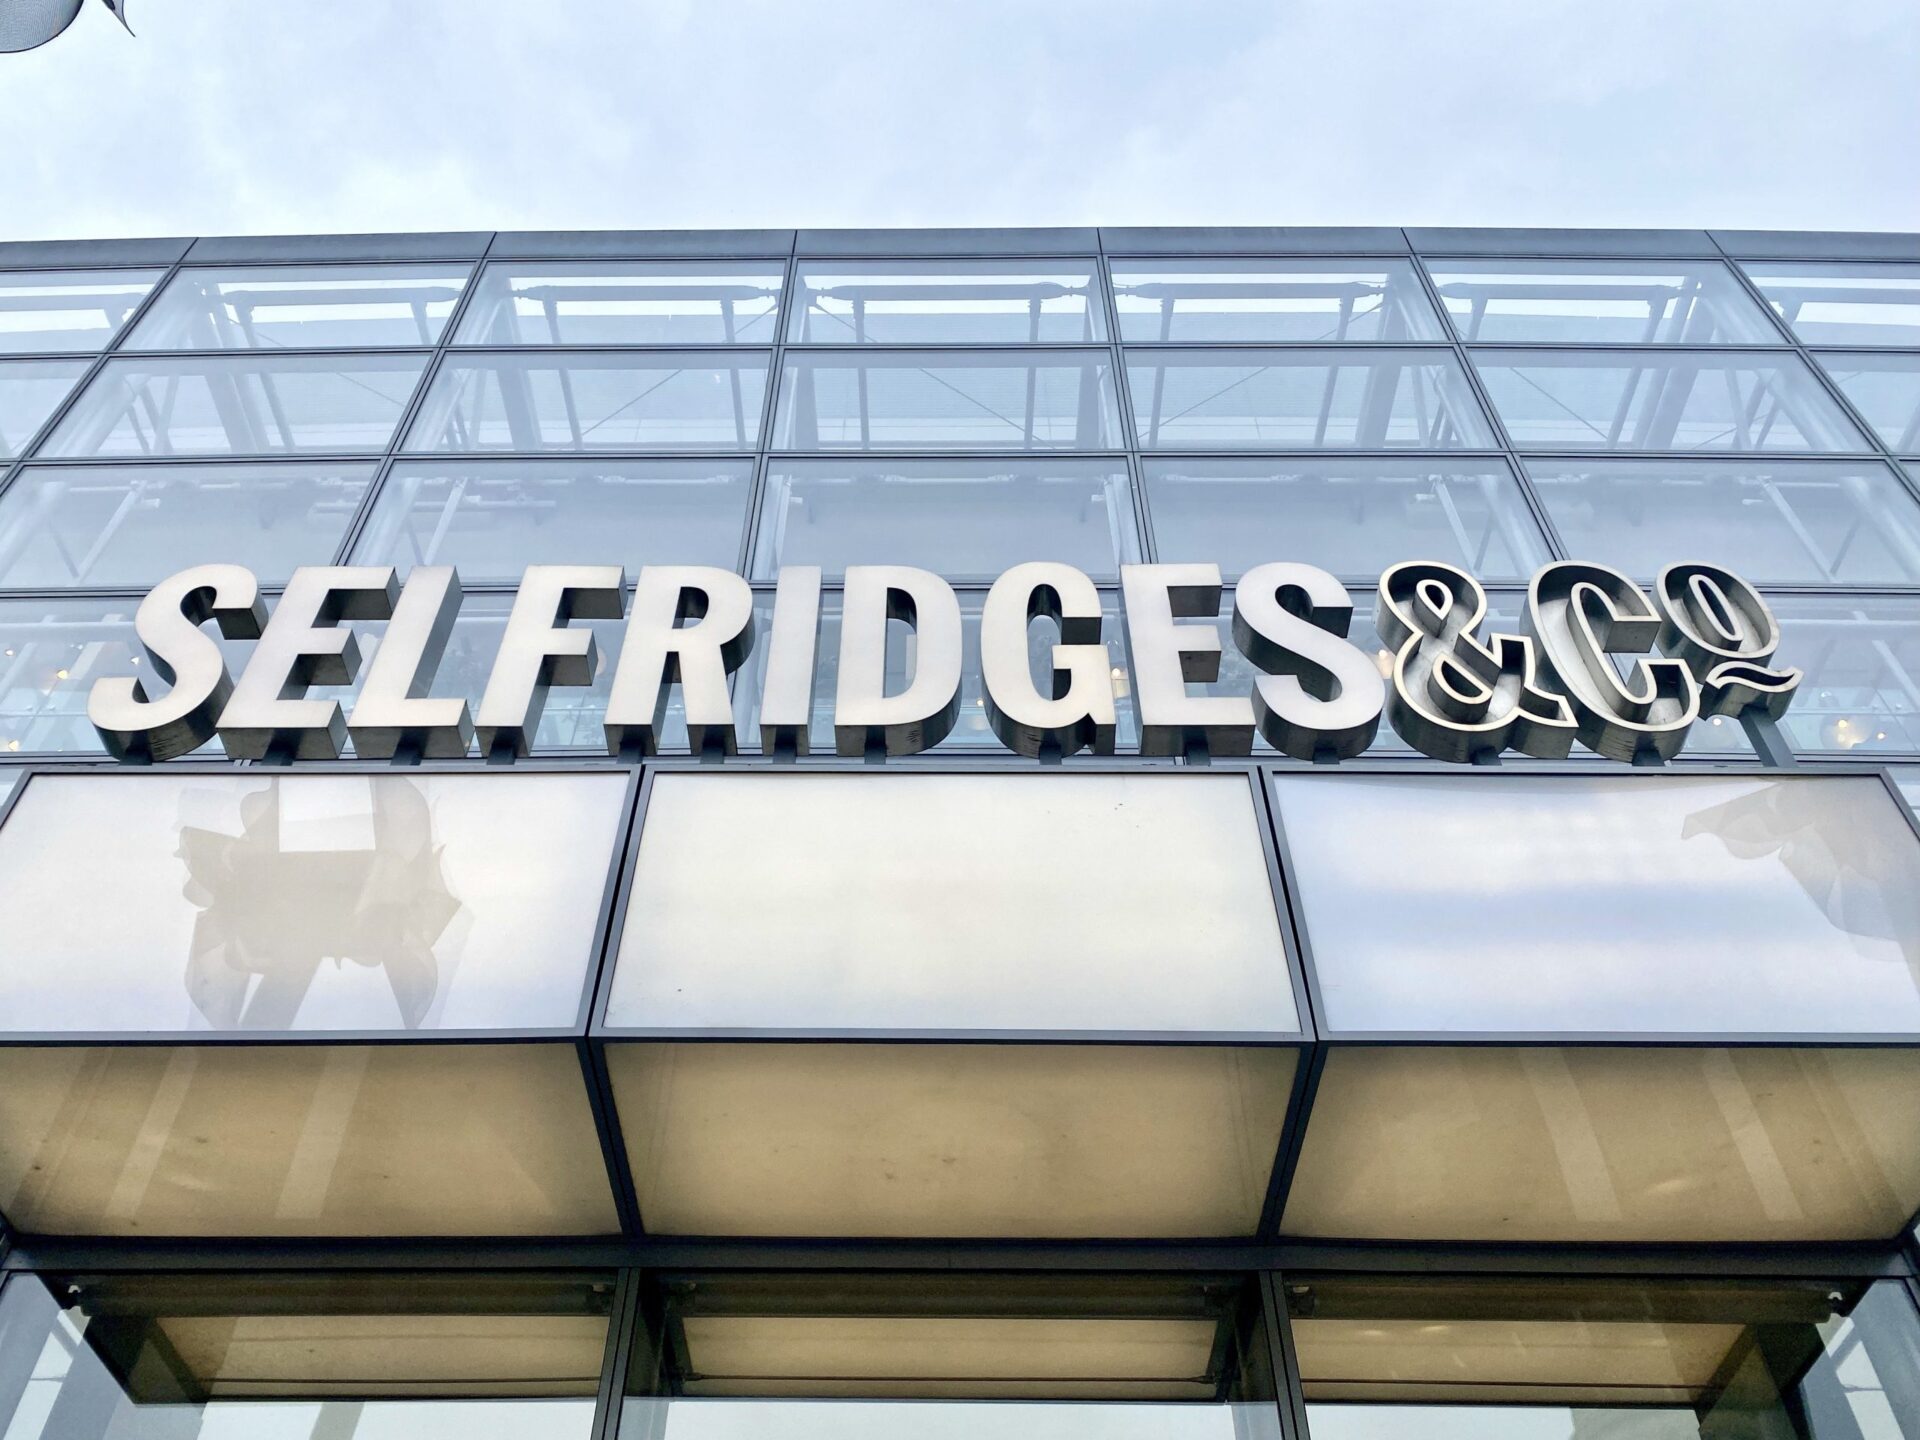 Selfridges for sale £4bn price tag after mystery buyer approaches